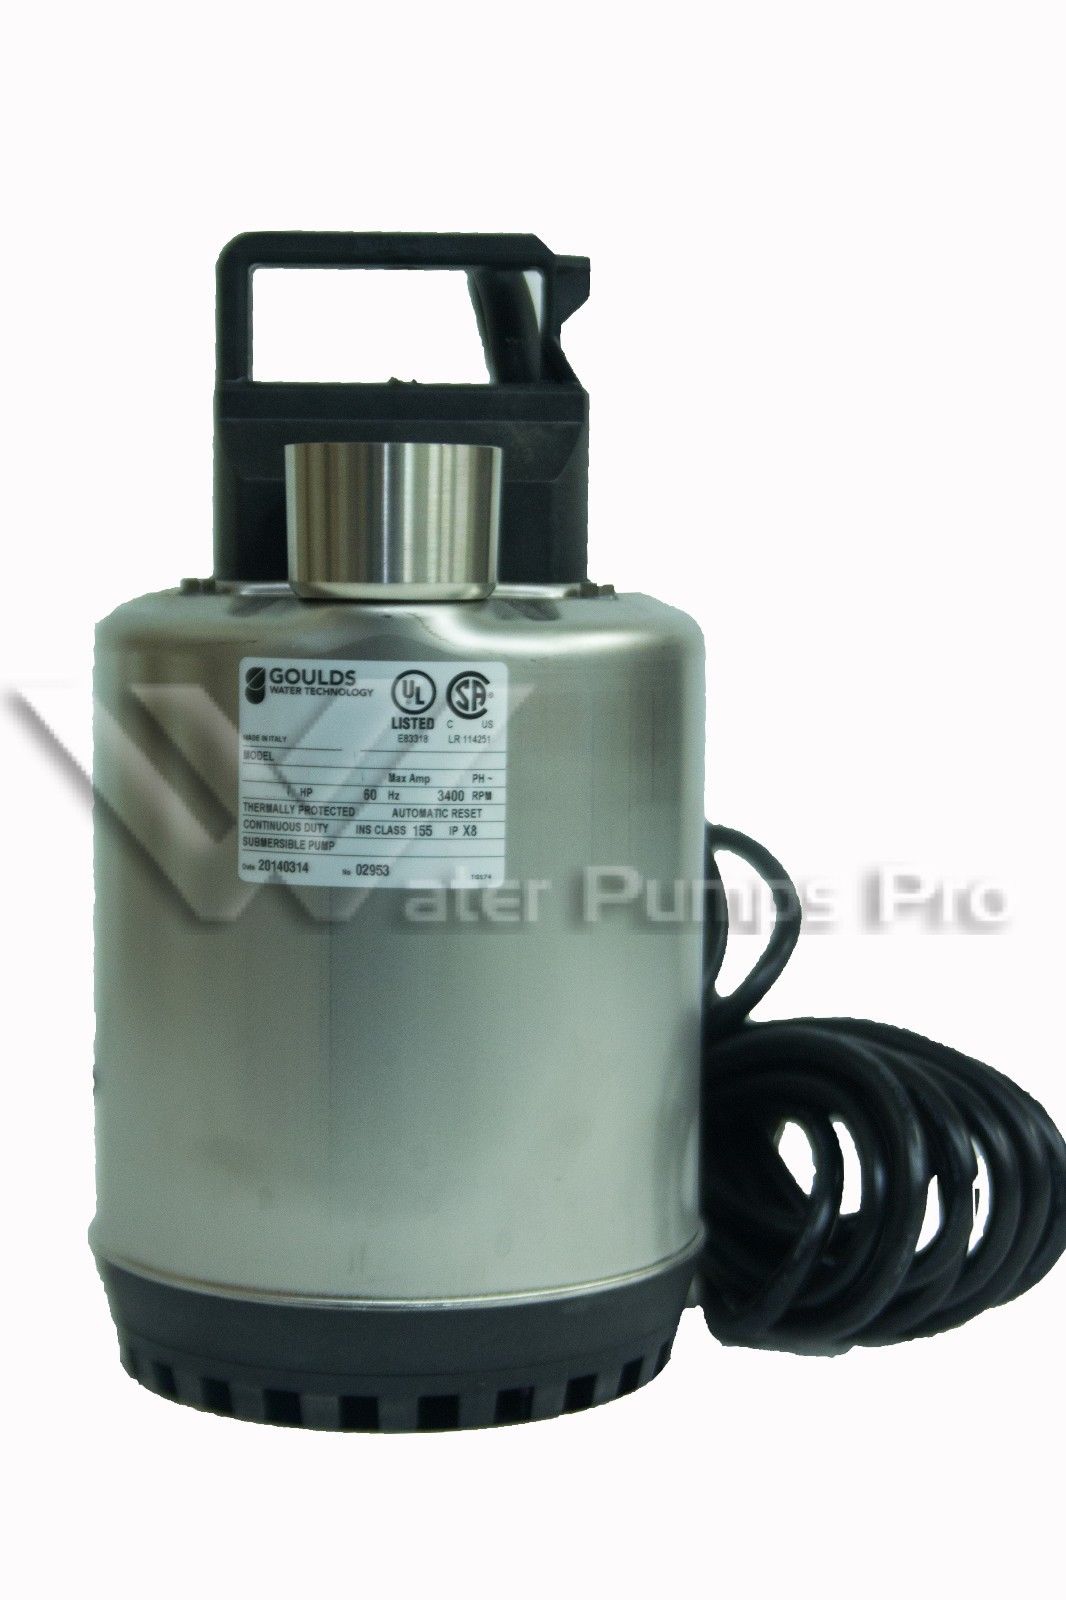 Goulds LSP0711F 3/4HP 115V- Submersible Sump Pump - Click Image to Close